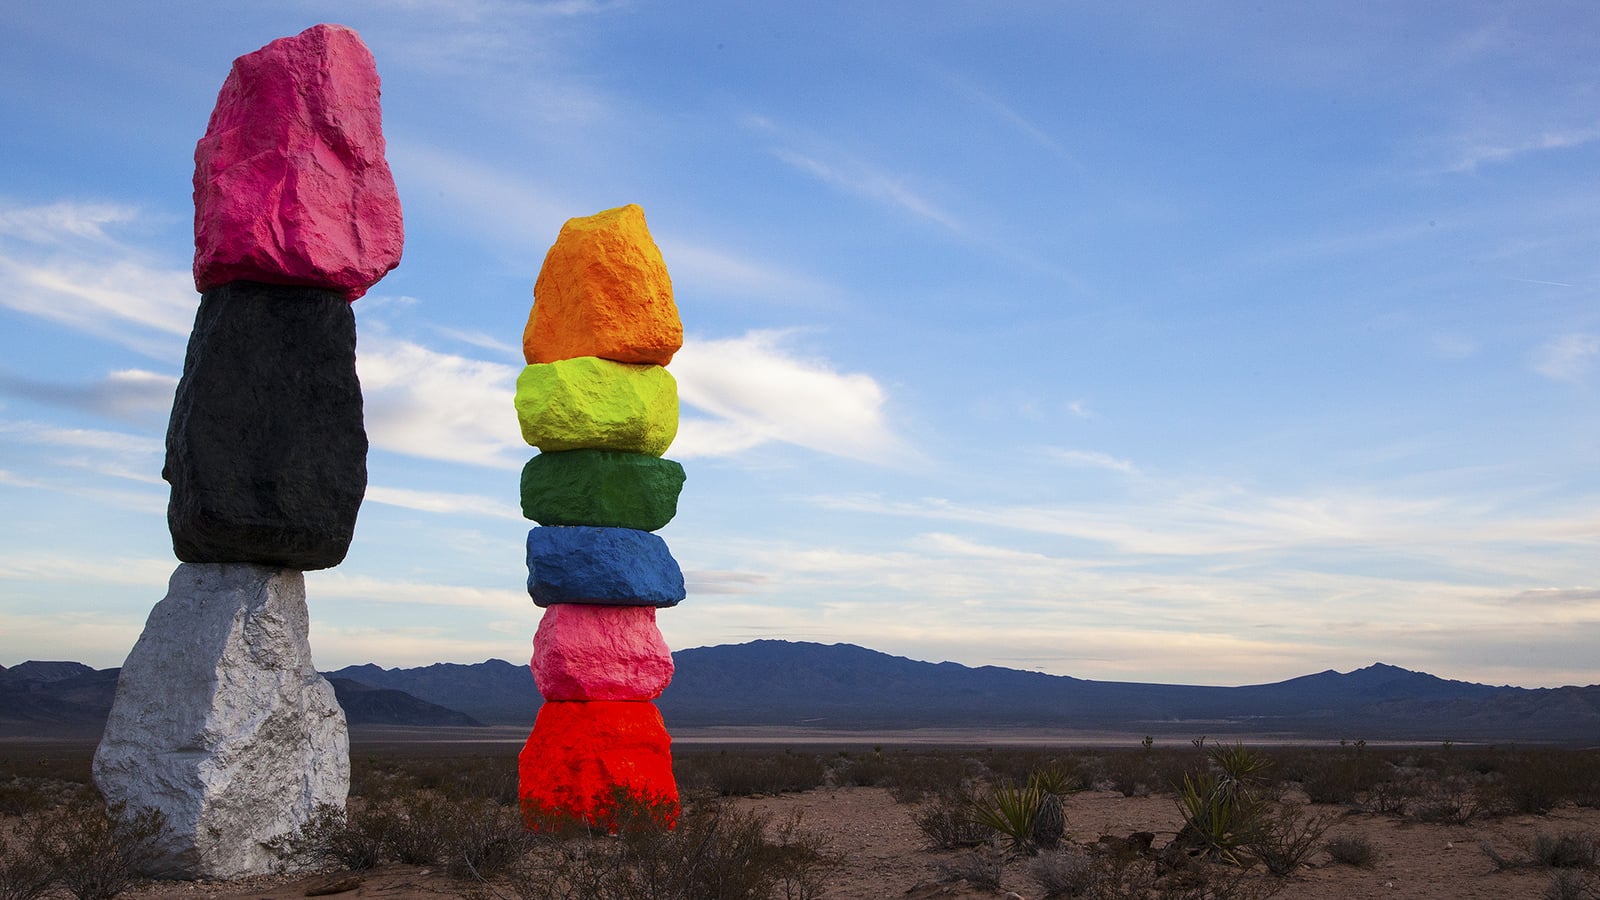 Traveling in USA: the Seven magic mountains, Nevada